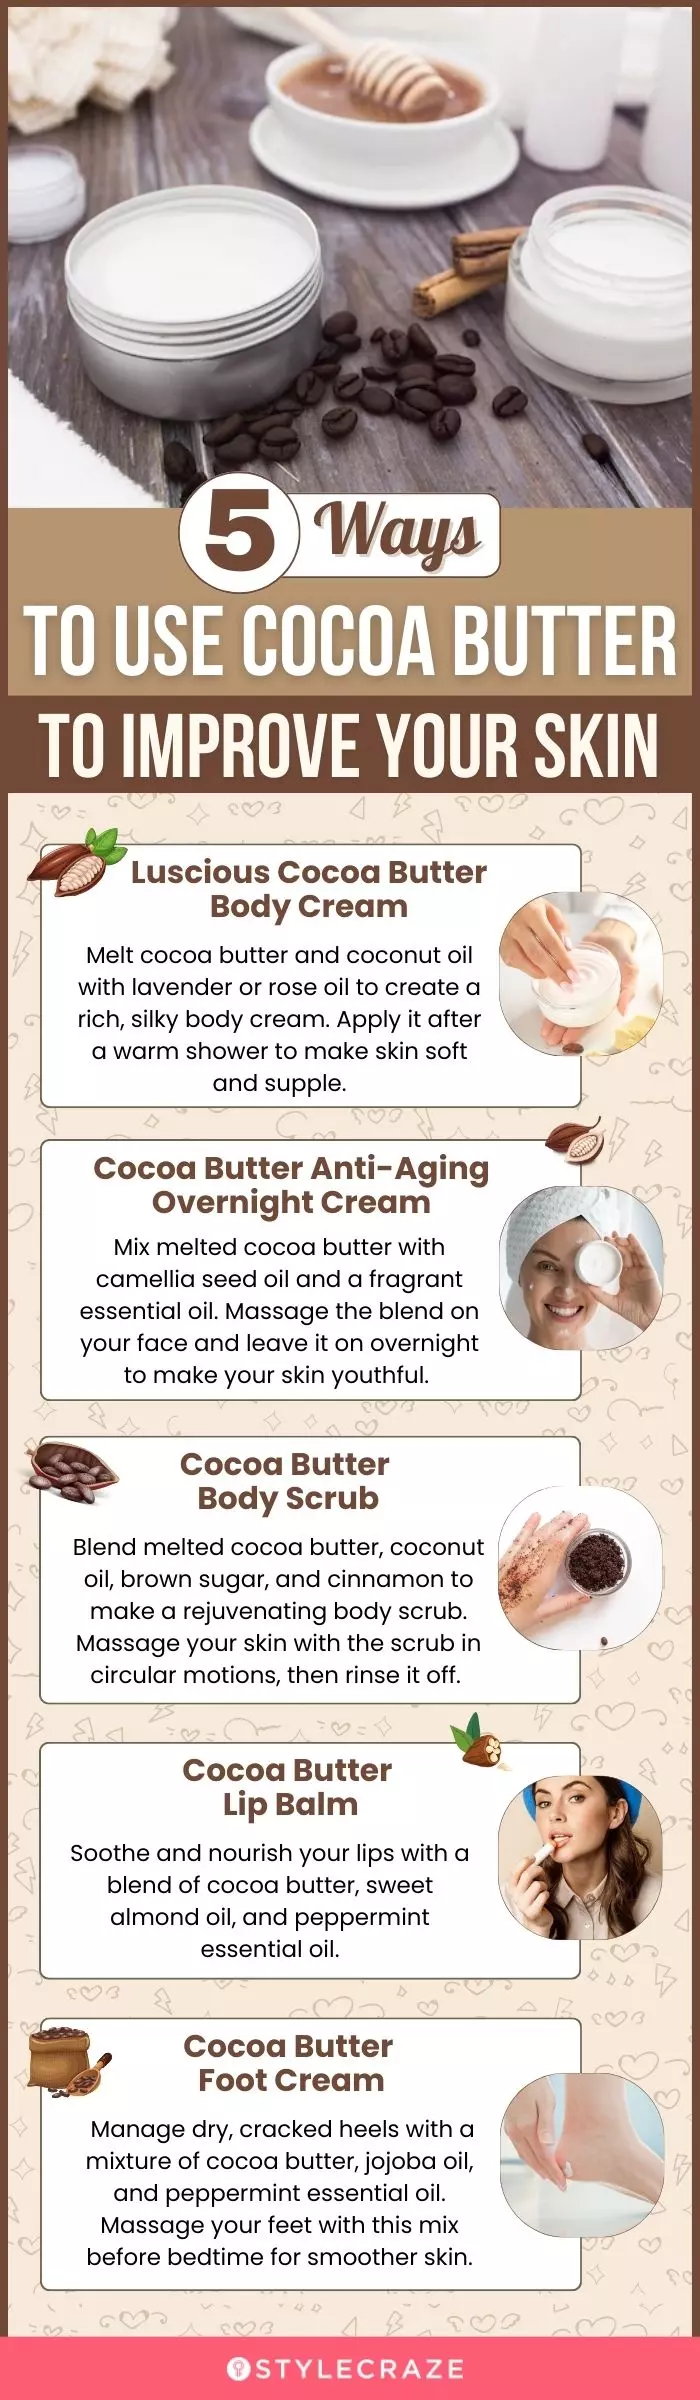 5 ways to use cocoa butter to improve your skin (infographic)